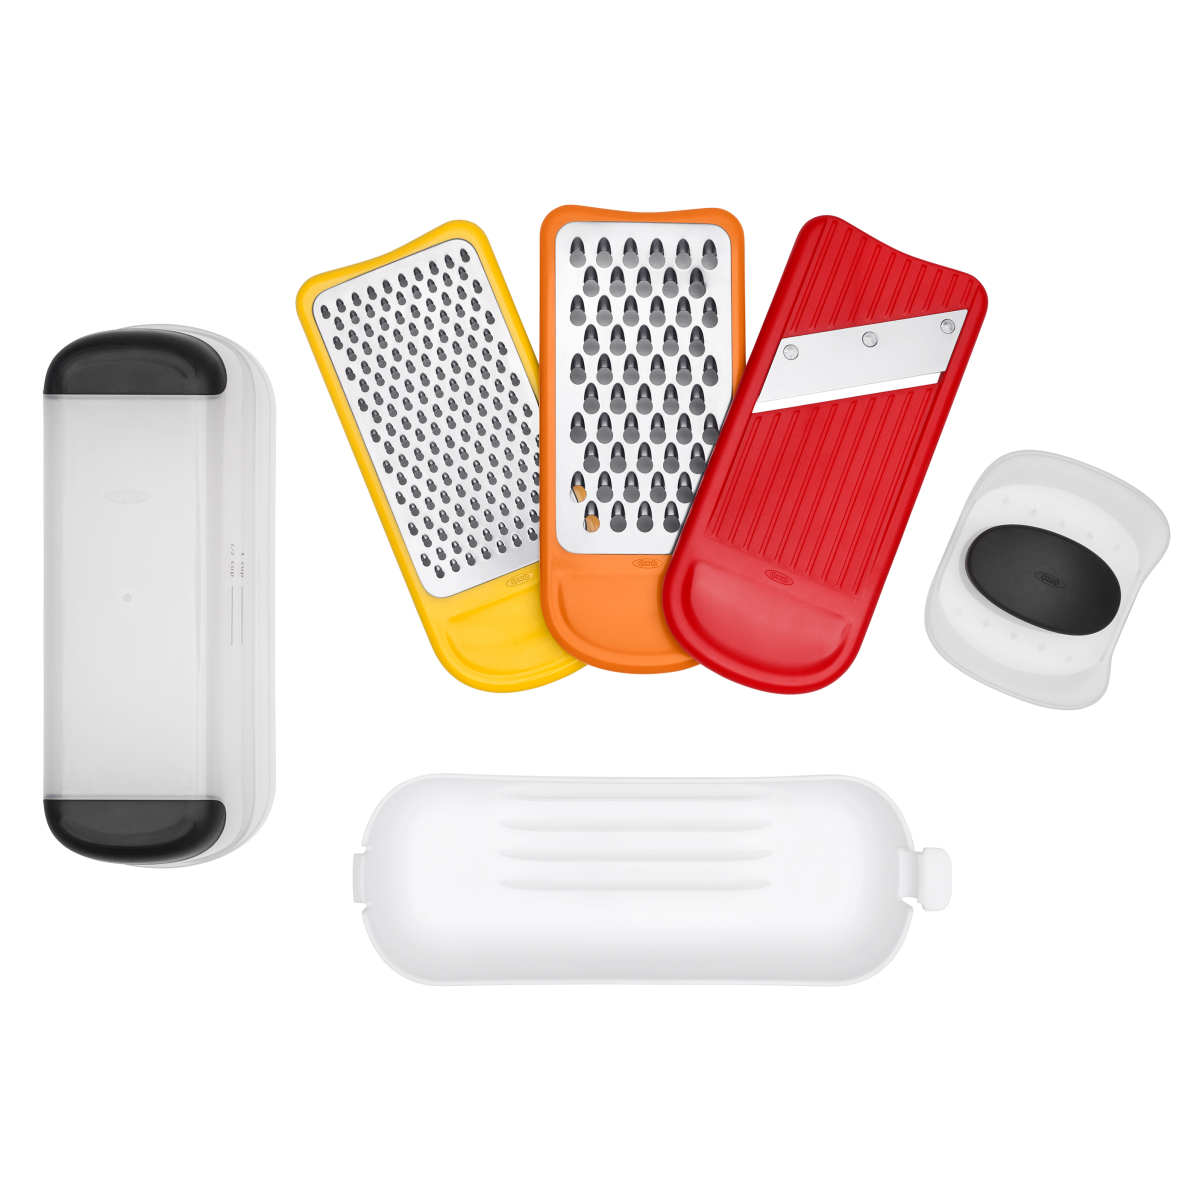 Oxo Complete Grate And Slice Set : Target